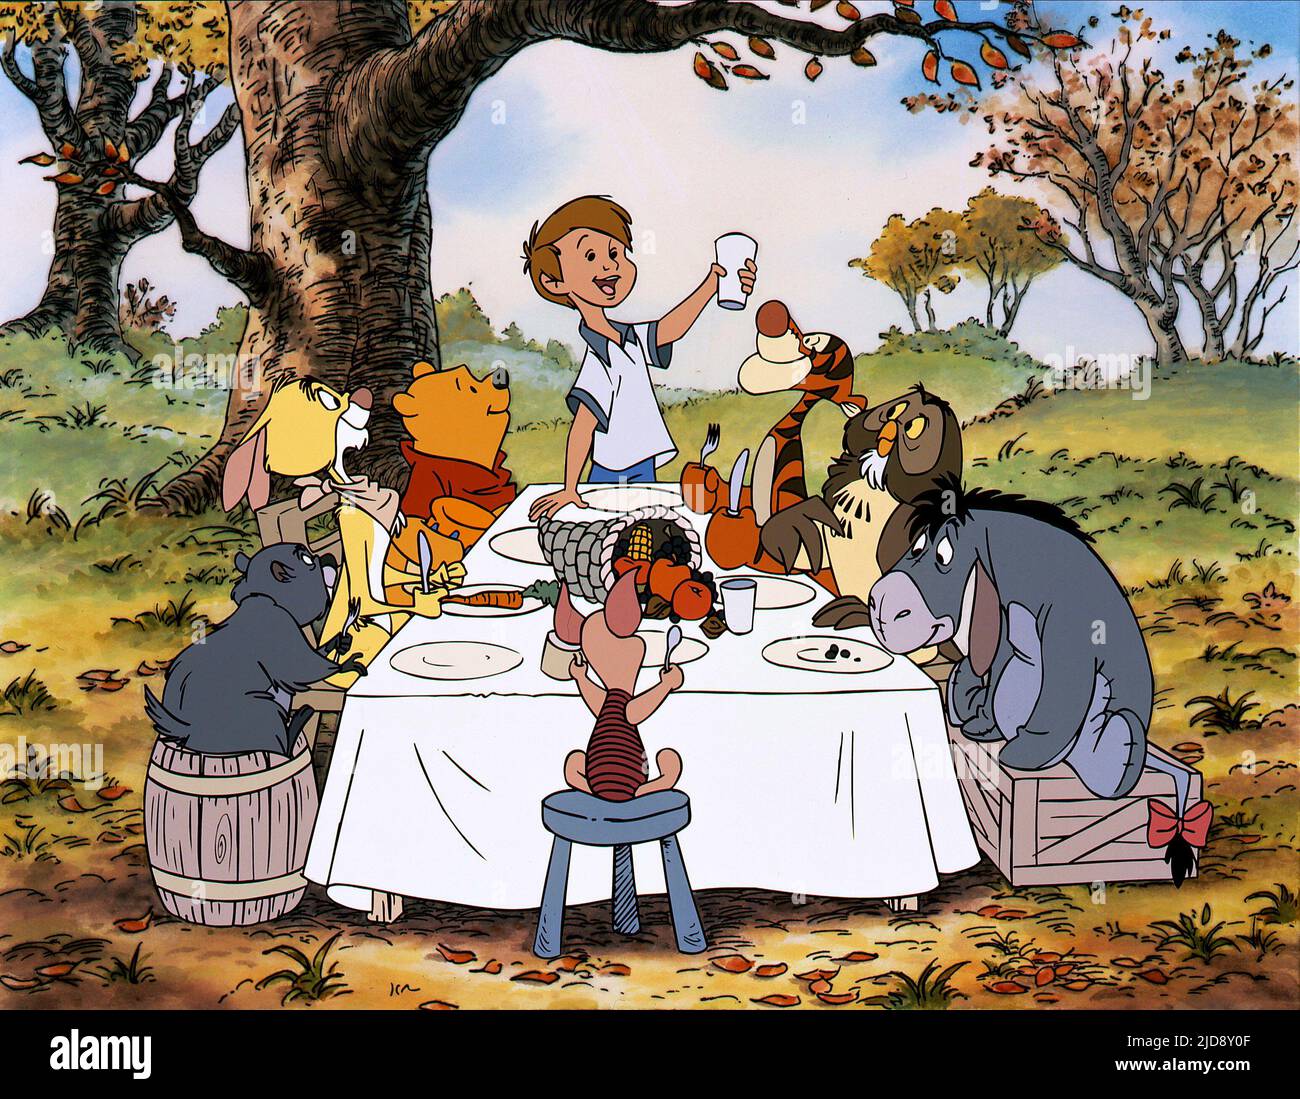 GOPHER,LAPIN,POOH,ROBIN,PORCELET,TIGGER,OWL,EEYORE, A WINNIE L'OURSON THANKSGIVING, 1998, Banque D'Images